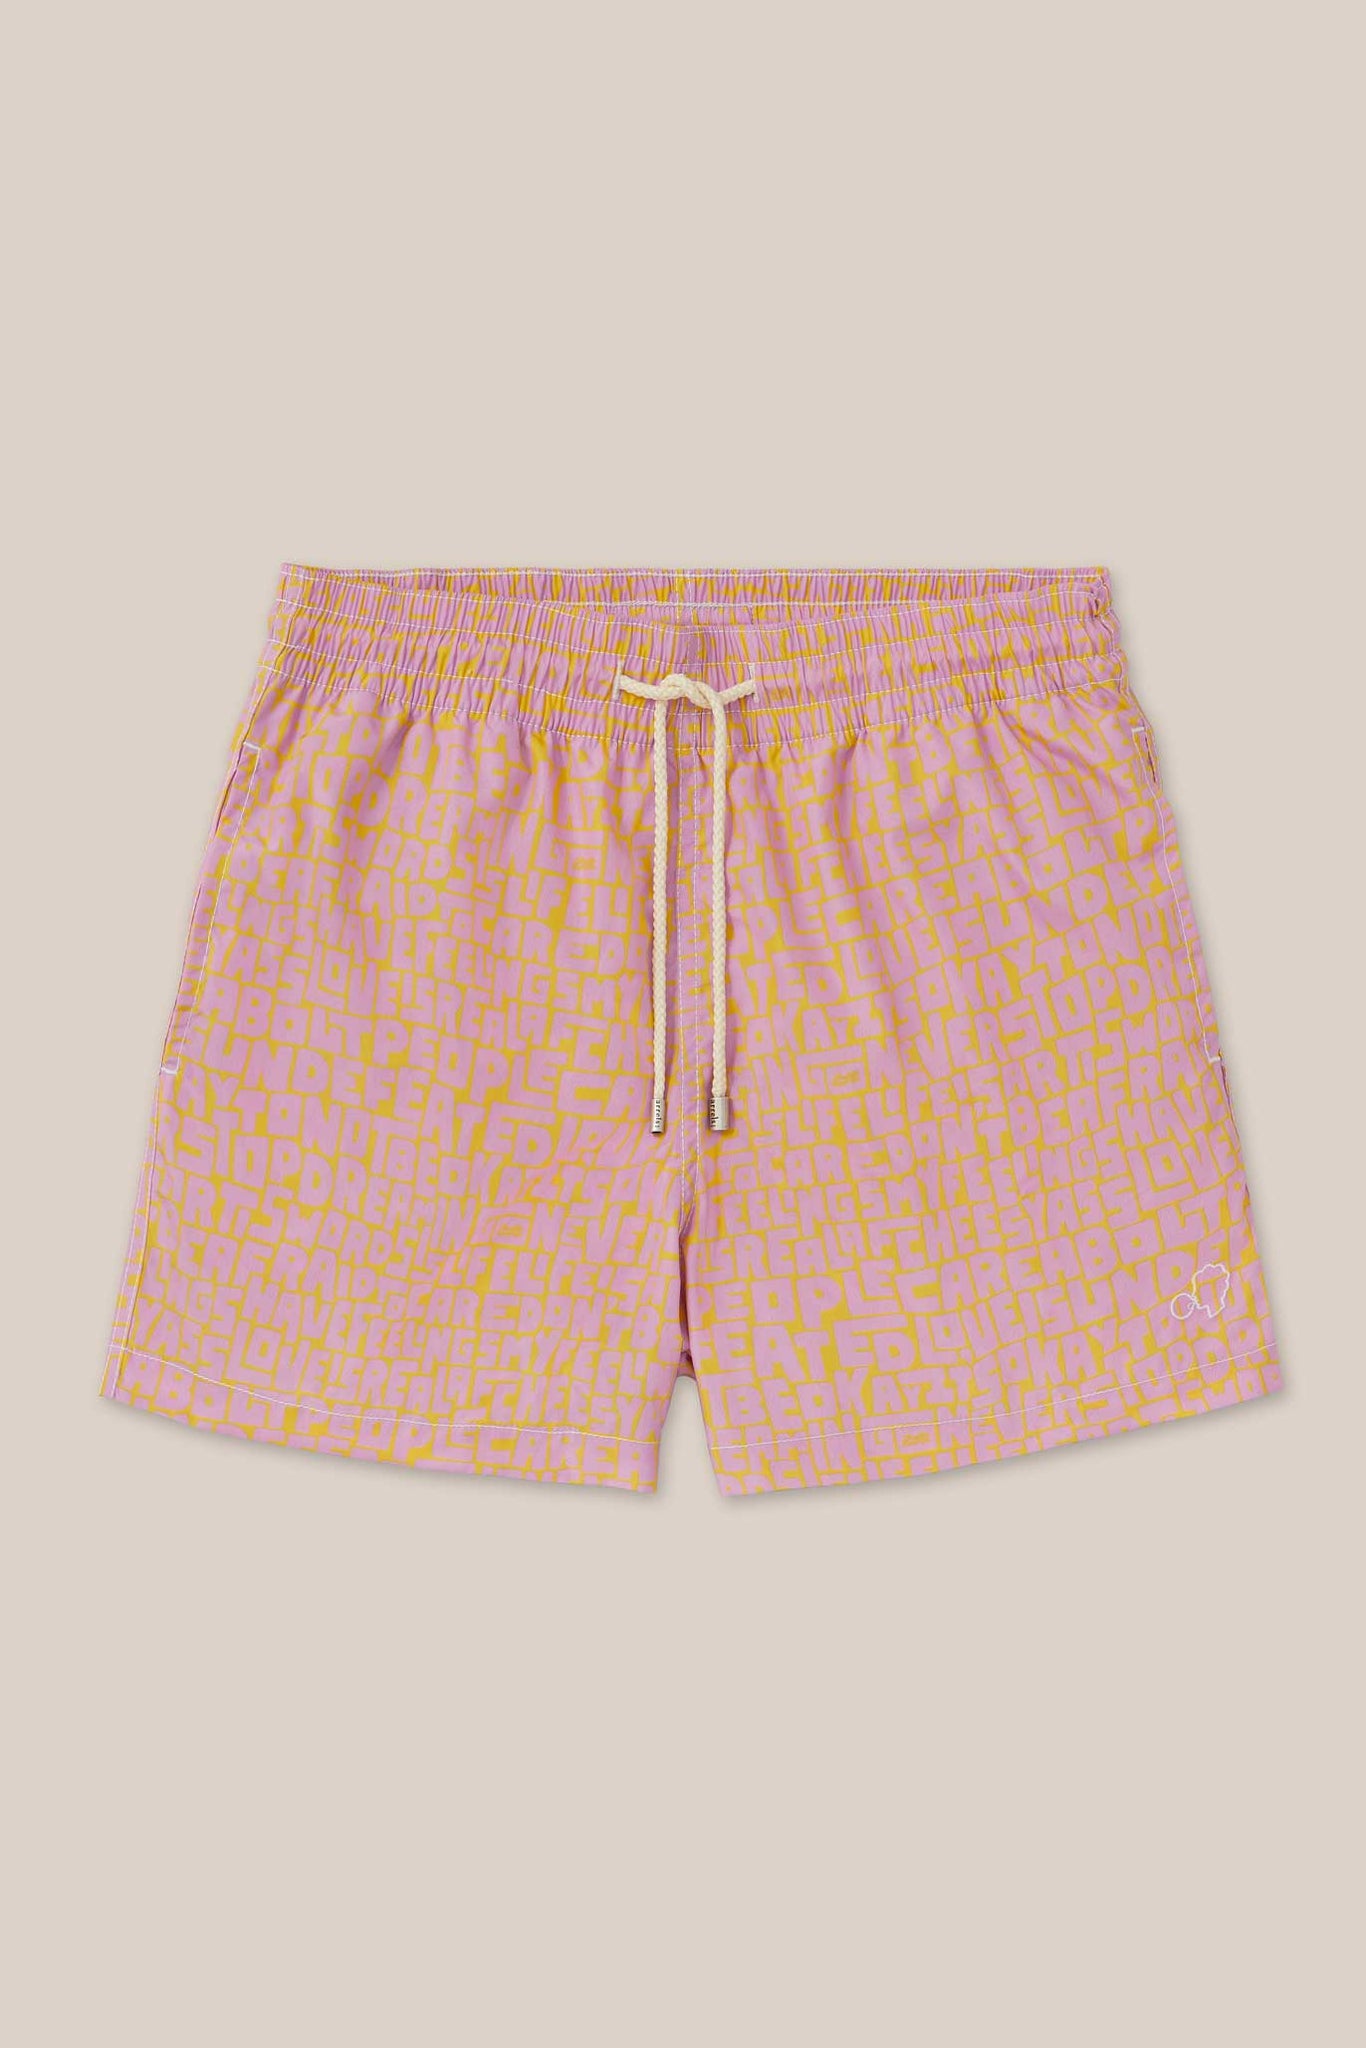 Swim Shorts Pink Never Stop Dreaming